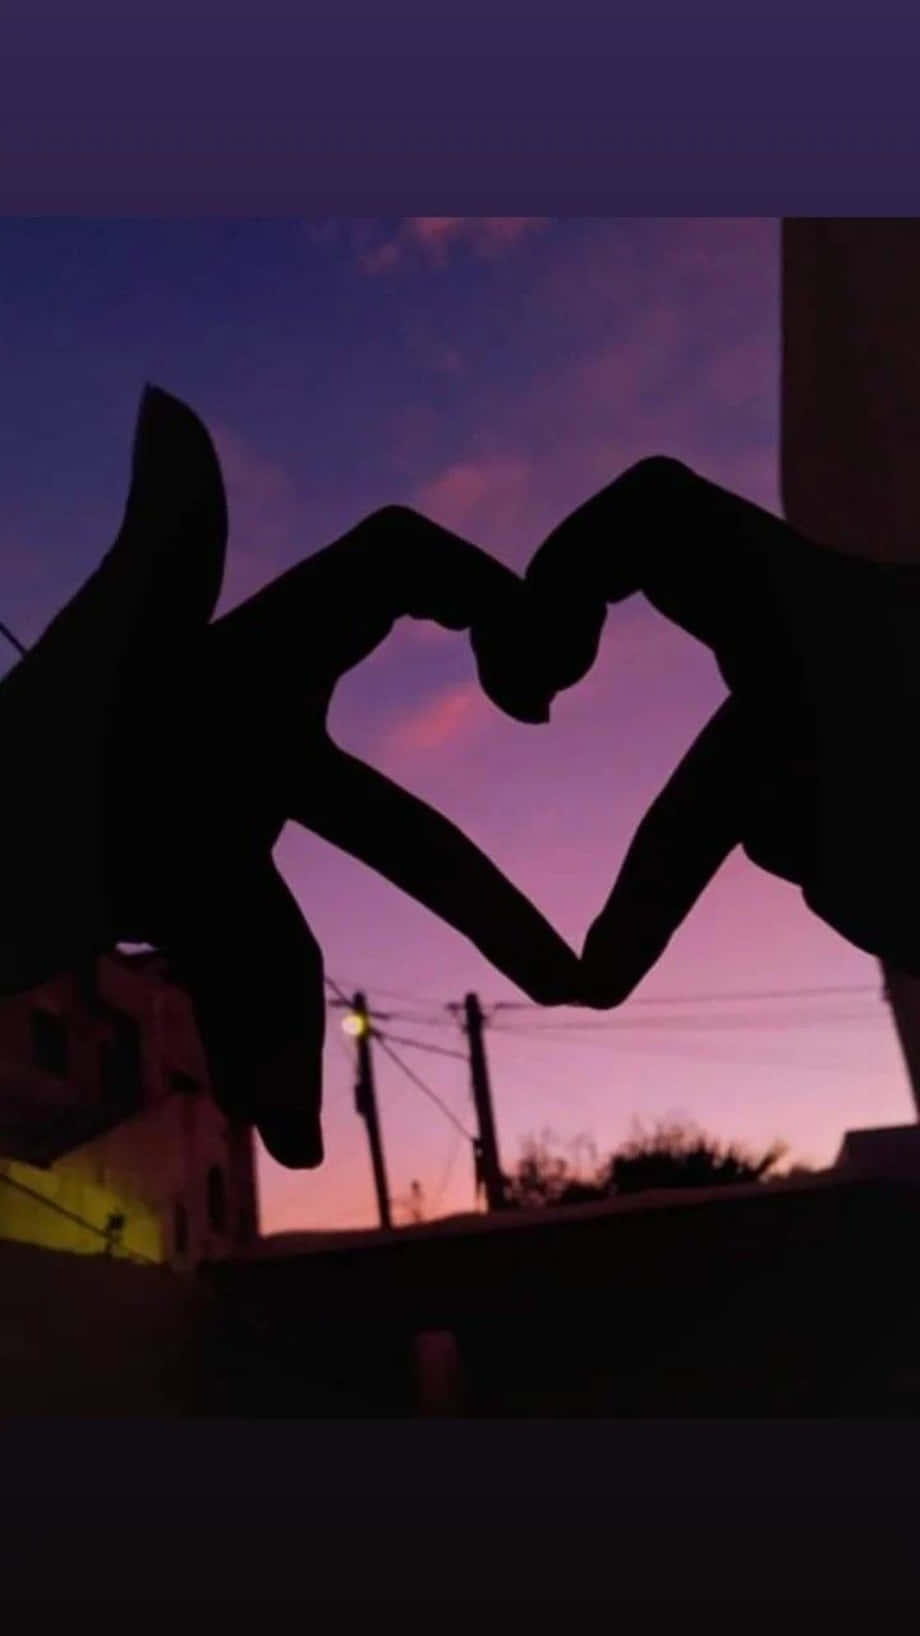 Love in Shadows - Heart Silhouette Against a Sunset Wallpaper